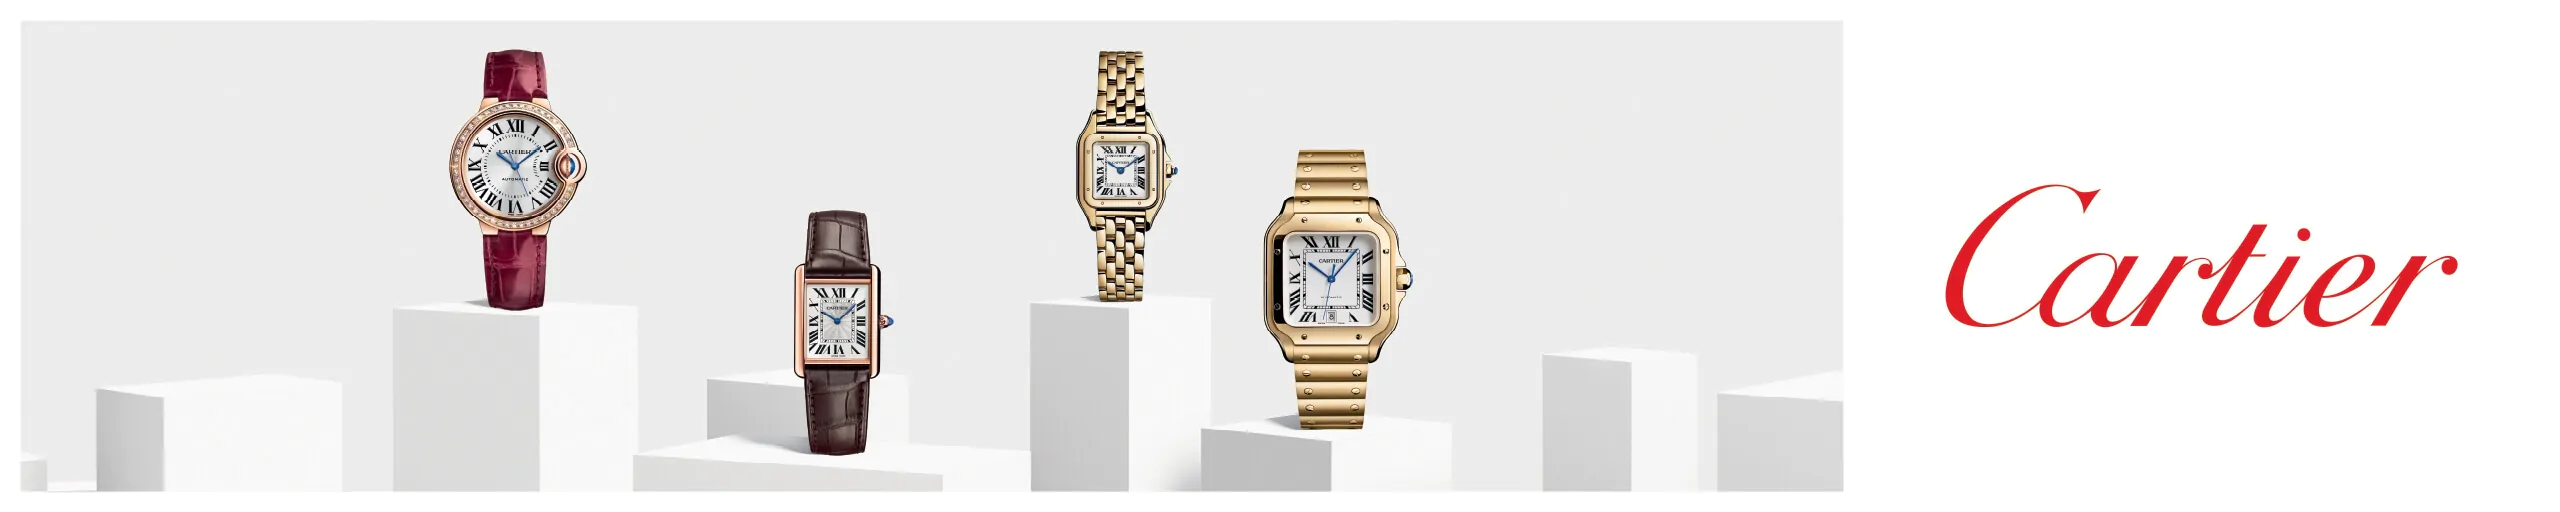 Introducing the World of Cartier to Laings online